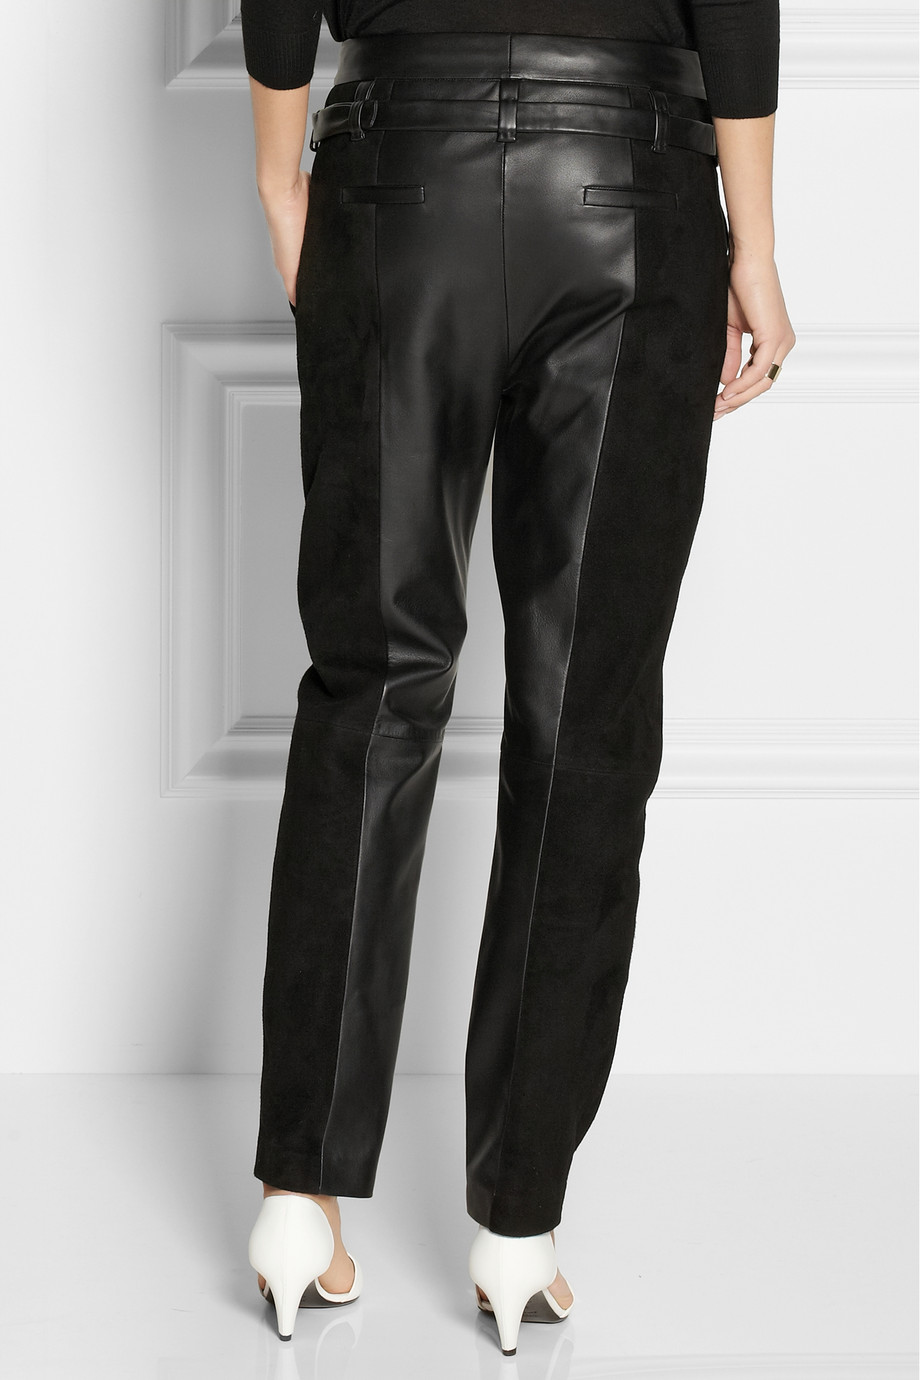 Lyst - Proenza Schouler Suede And Leather Tapered Pants in Black